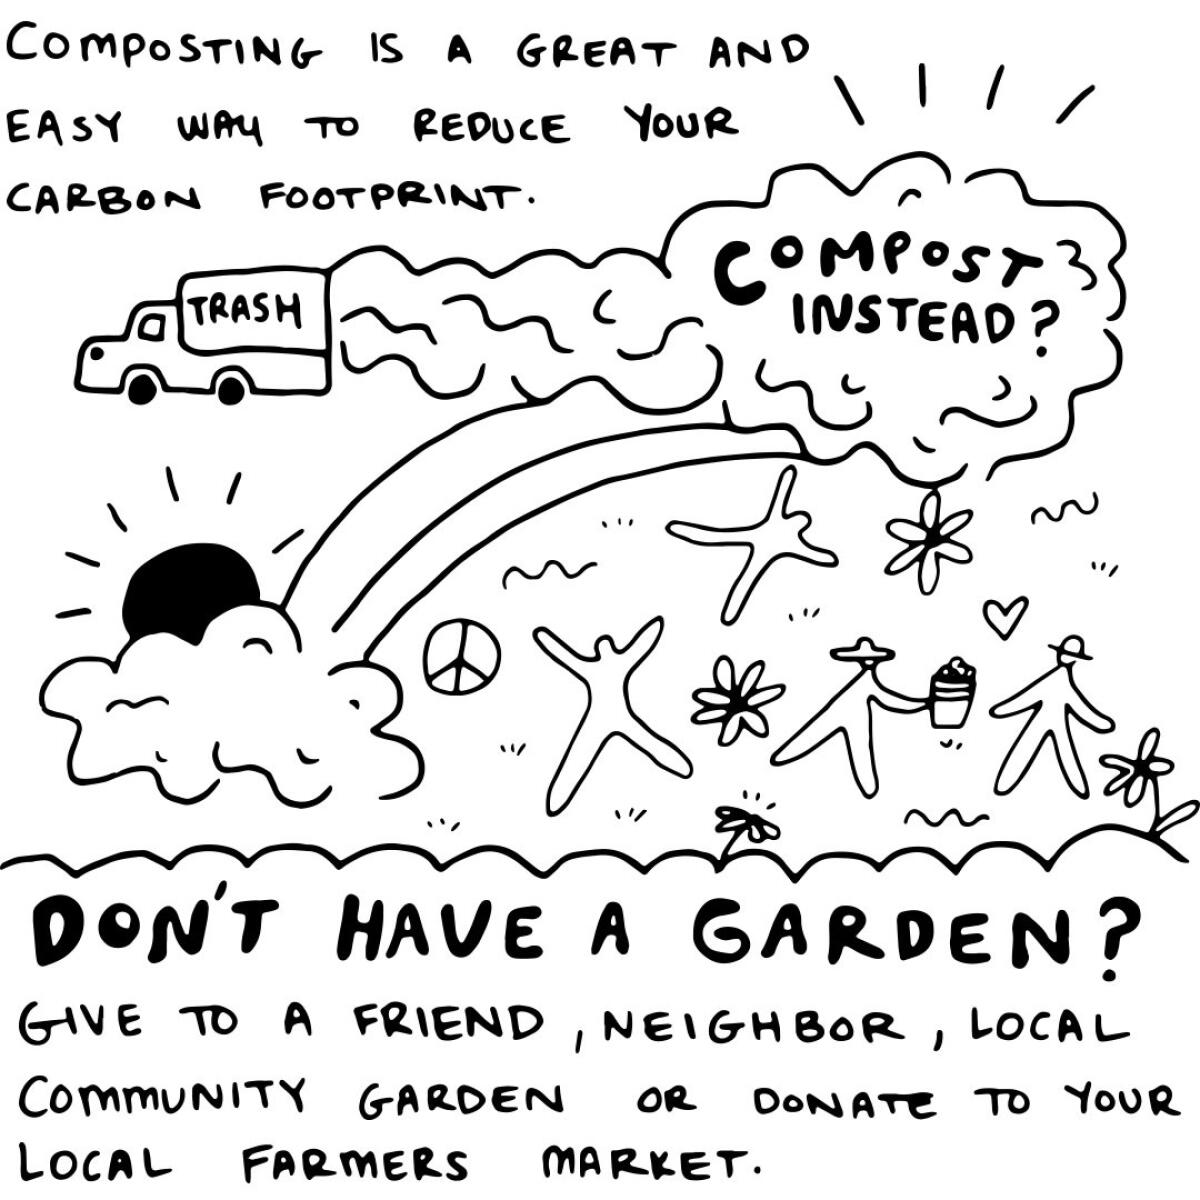 "composting is a great and easy way to reduce your carbon footprint. Dont have a garden? give to a friend or neighbor."